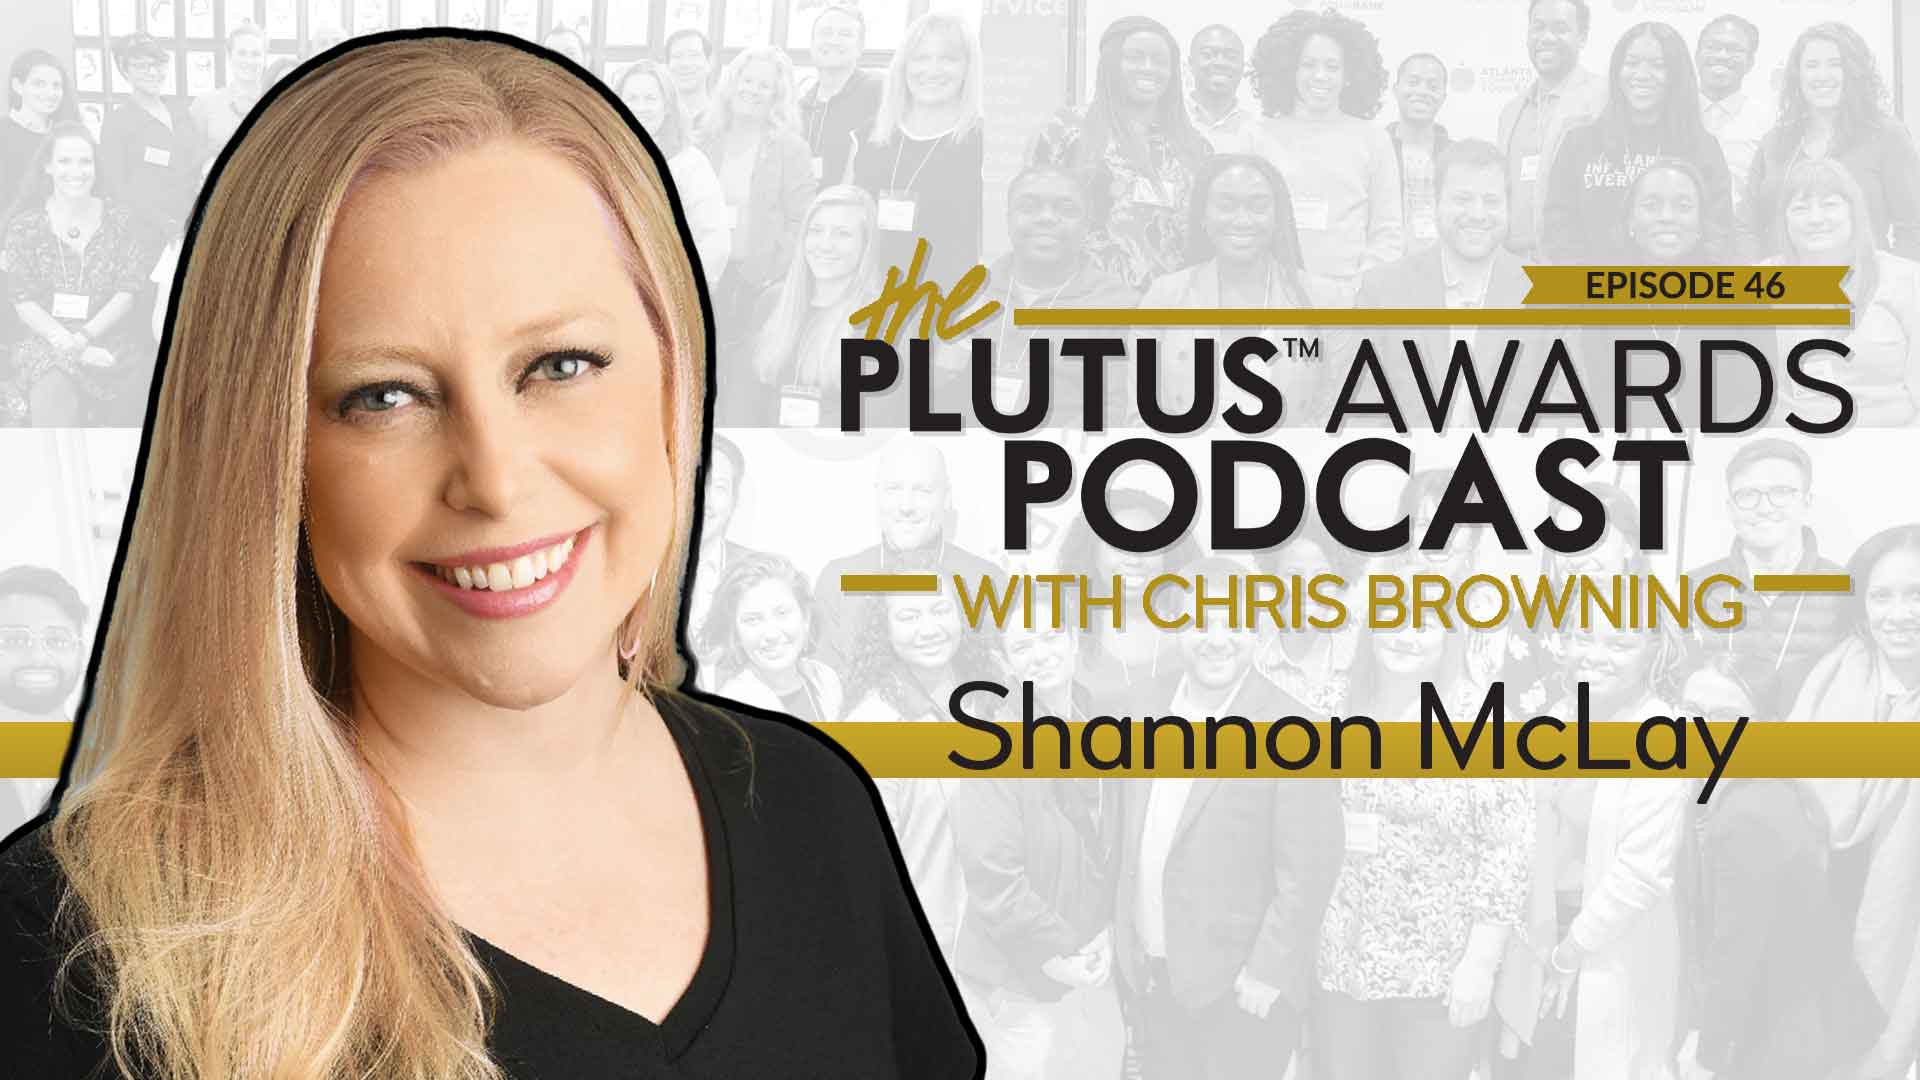 Plutus Awards Podcast - Shannon McLay Featured Image